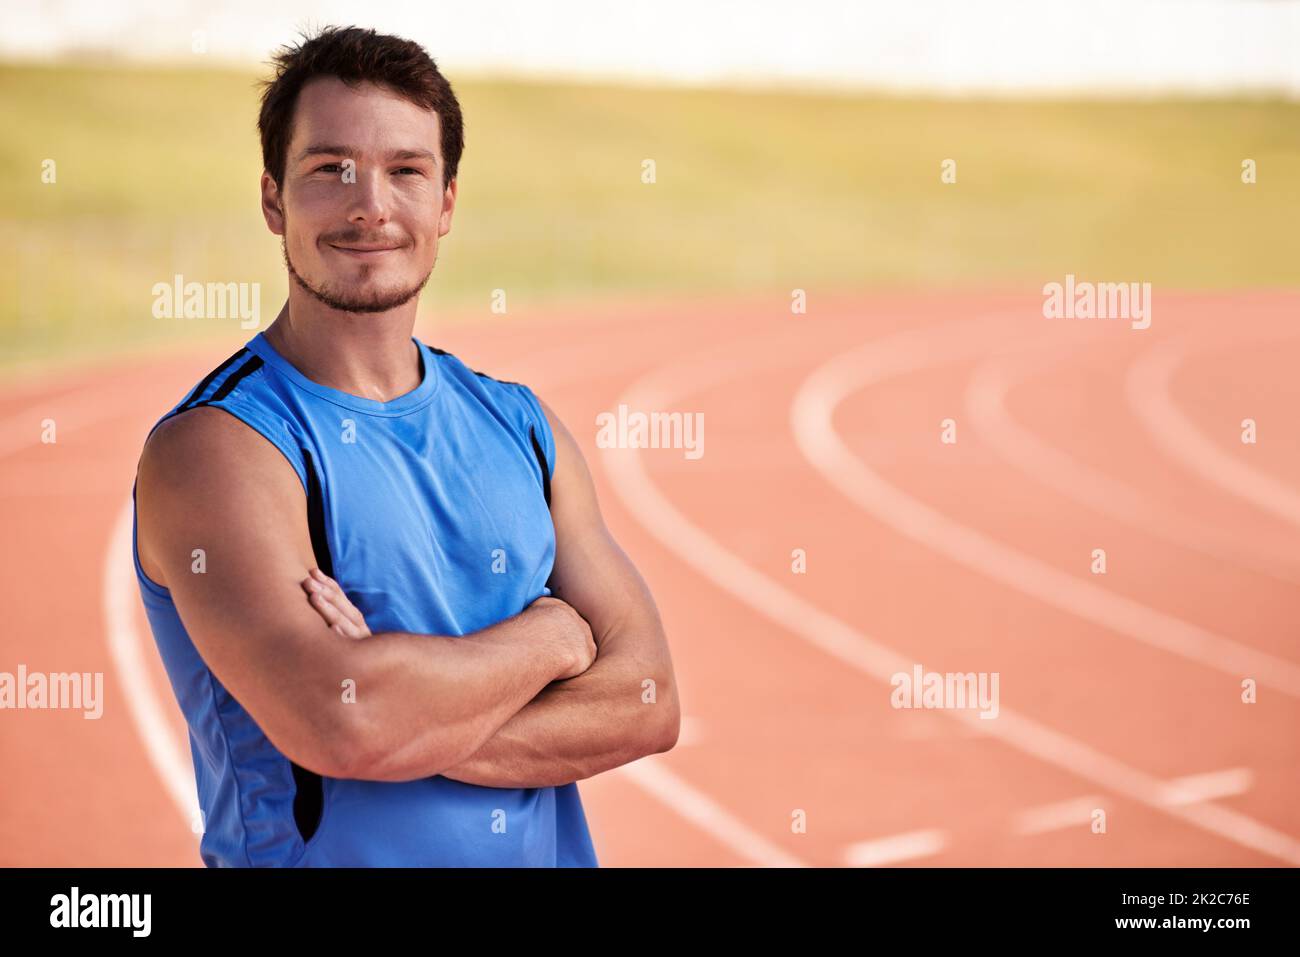 Hes ready to race. Shot of a handsome young runner out on the track. Stock Photo